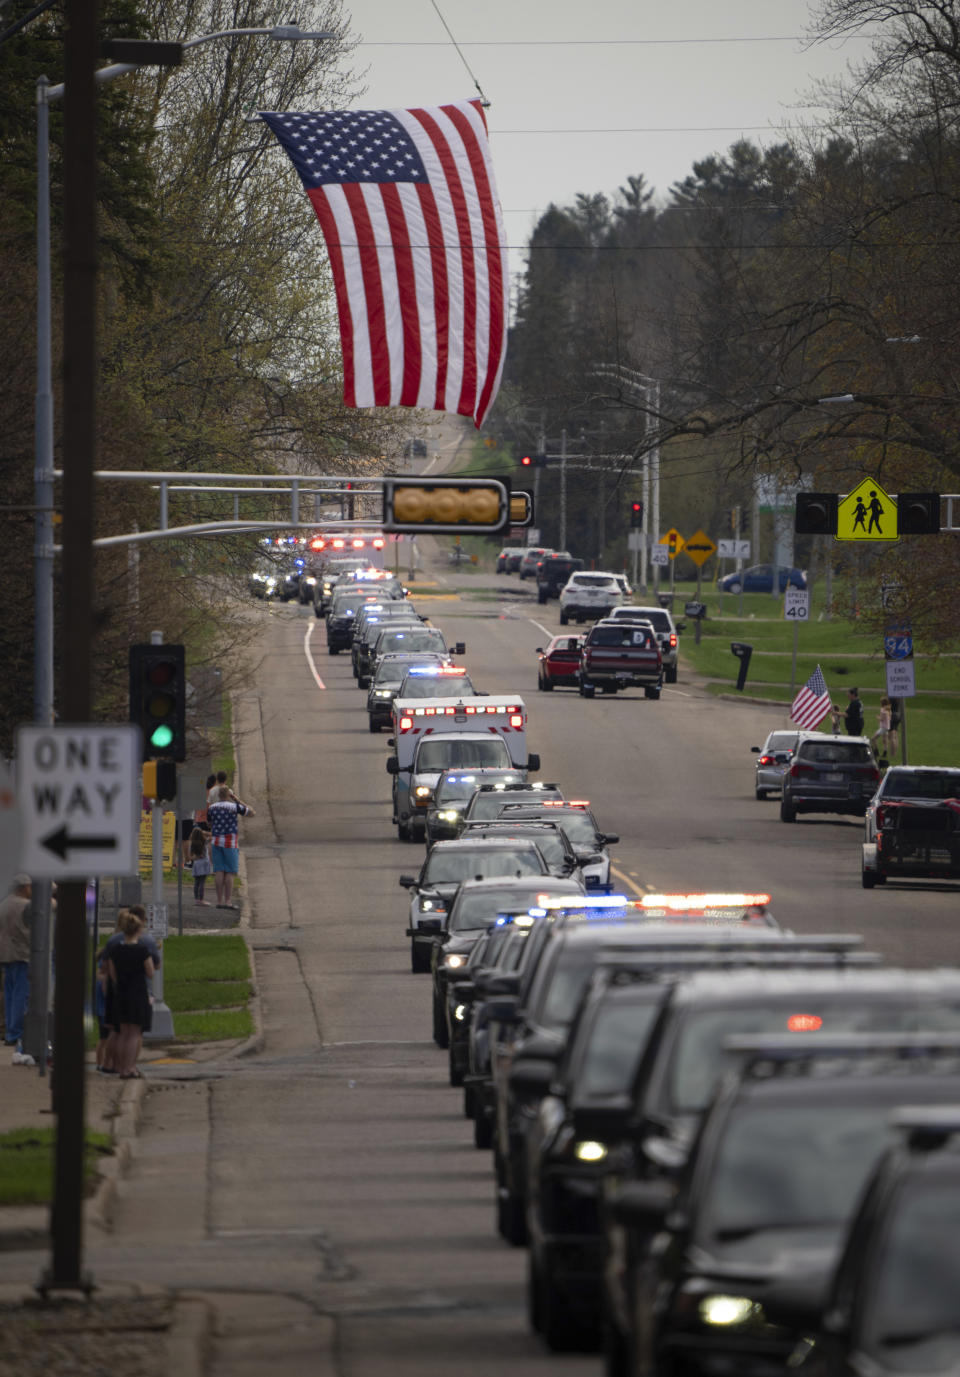 A procession of dozens of law enforcement vehicles follow the vehicle carrying St. Croix County Deputy Kaitie Leising's body near a Baldwin, Wis., funeral home Sunday afternoon, May 7, 2023. Leising was shot and killed during a traffic stop Saturday. (Jeff Wheeler/Star Tribune via AP)